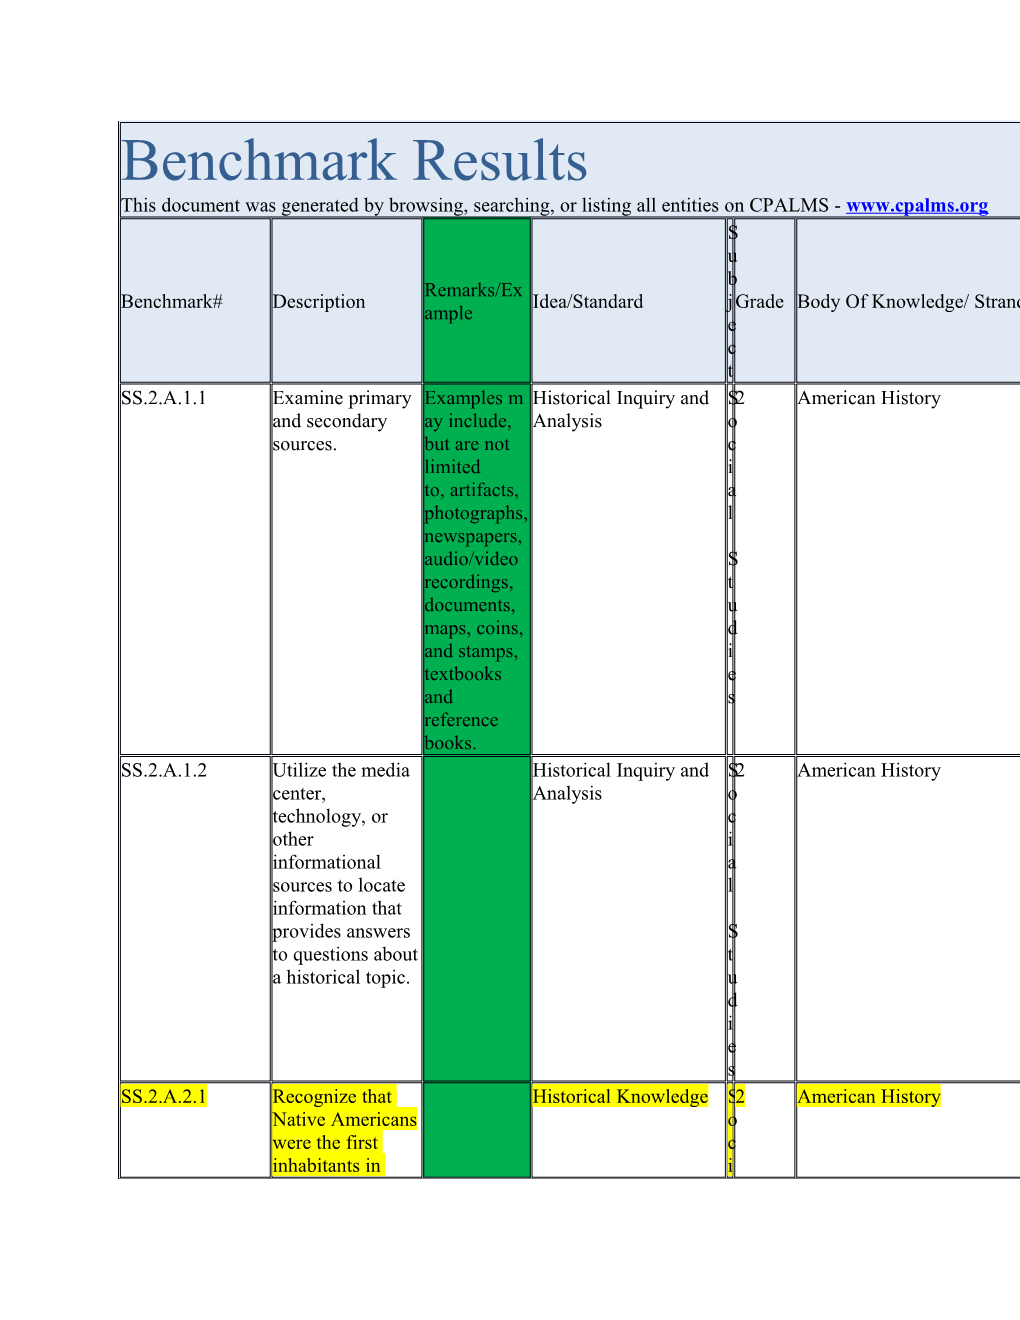 Benchmark Results This Document Was Generated by Browsing, Searching, Or Listing All Entities